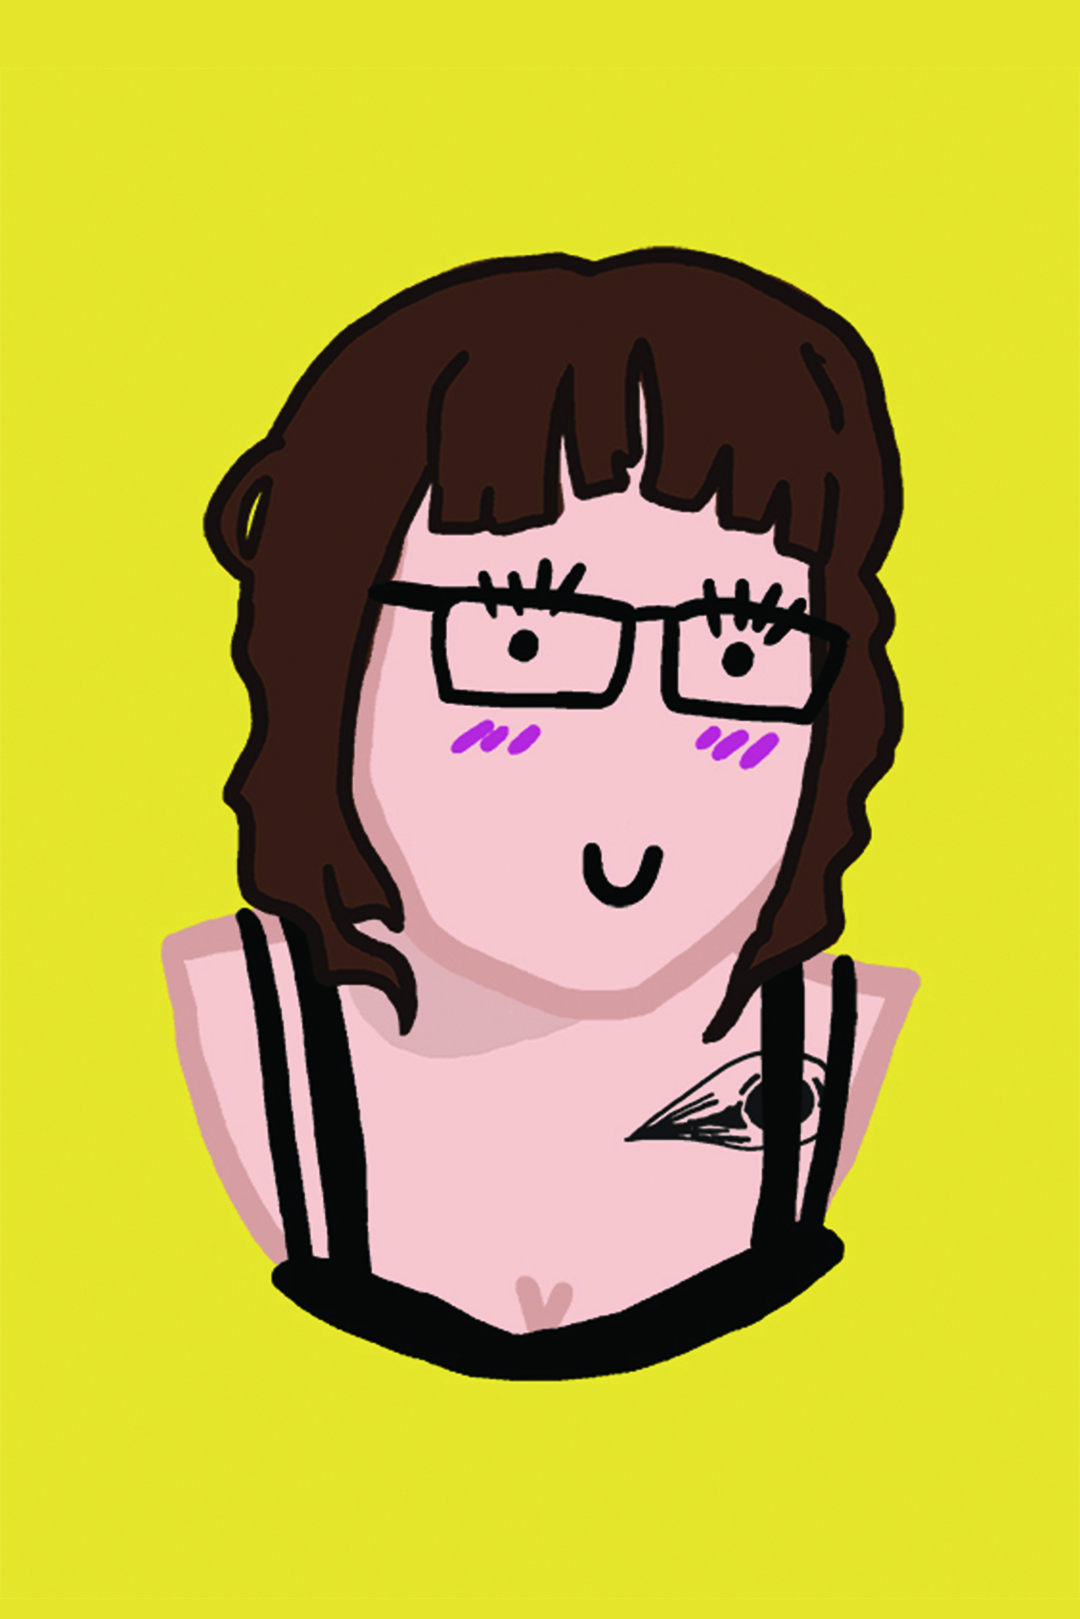 Cartoon-like digital drawing of a person with shoulder-length brown hair, fringe, glasses, black sleeveless top and a tattoo